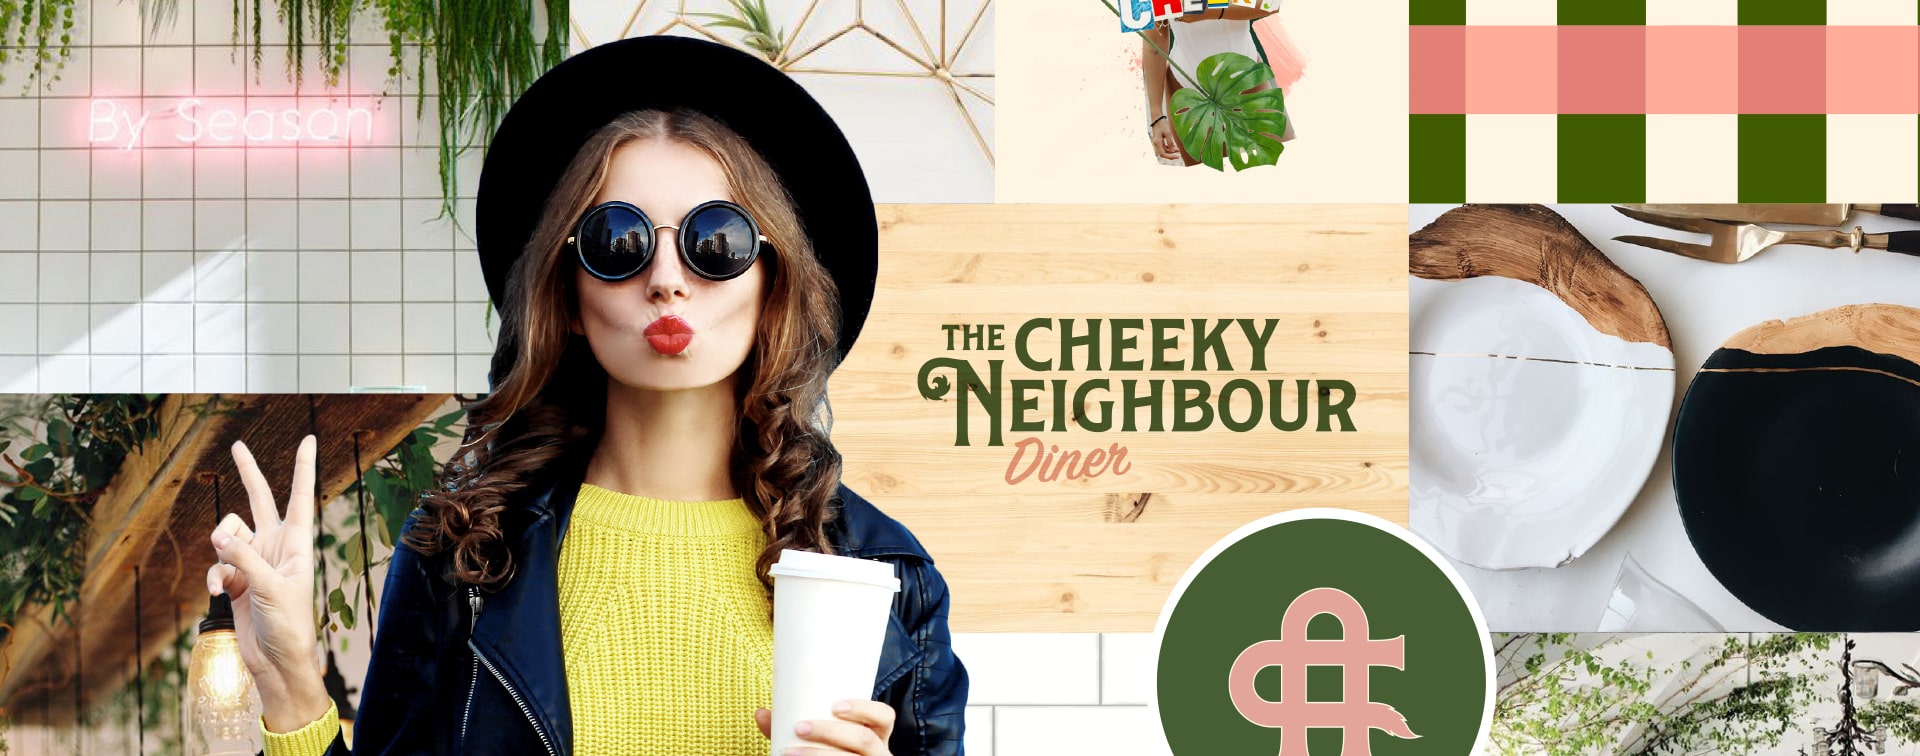 The Cheeky Neighbour Diner